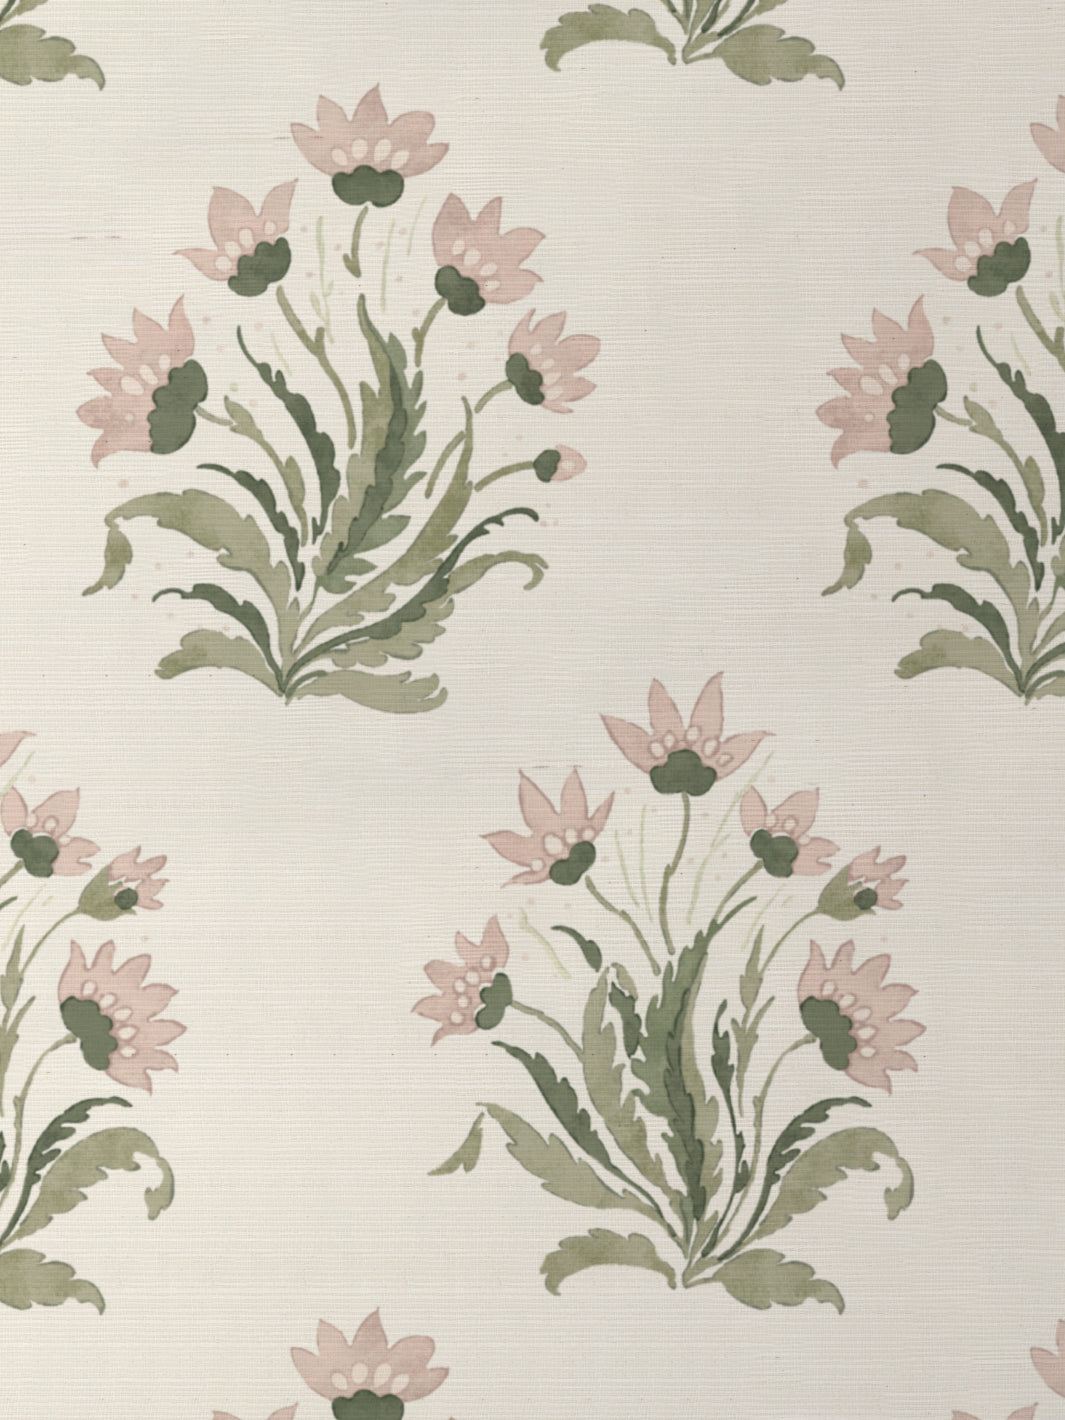 'Hillhouse Block Print Large' Grasscloth Wallpaper by Nathan Turner - Pink Green